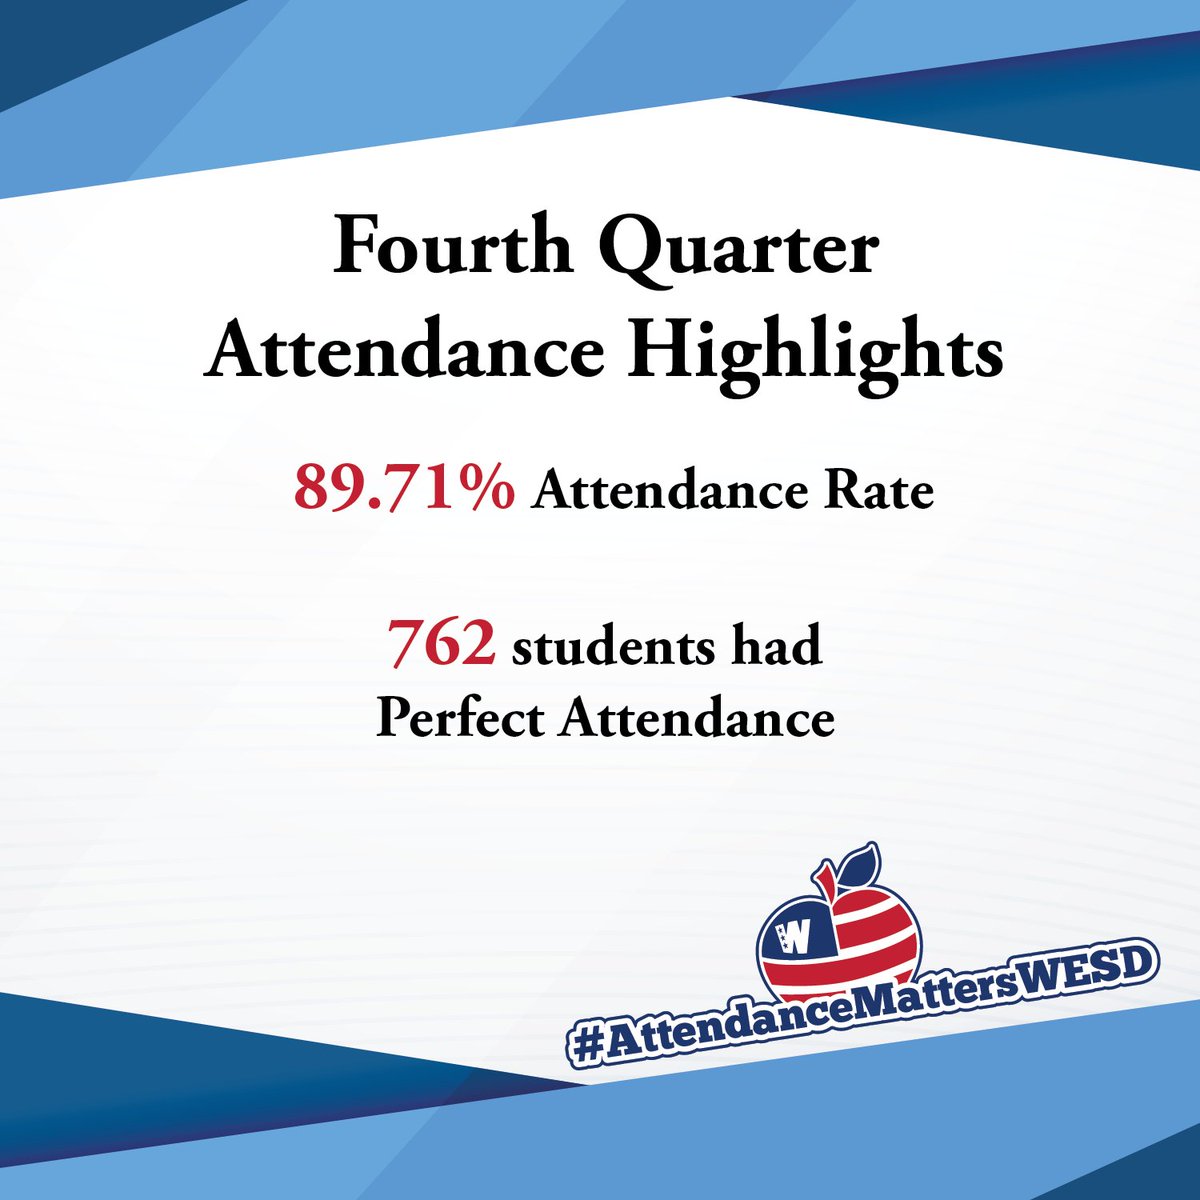 Amazing job to our 762 students who finished the 2022-2023 school year strong with perfect attendance for the fourth quarter! Thanks to their commitment to being in school each day, we reached an attendance rate of 89.7% as a district! #WESDFamily #AttendanceMattersWESD